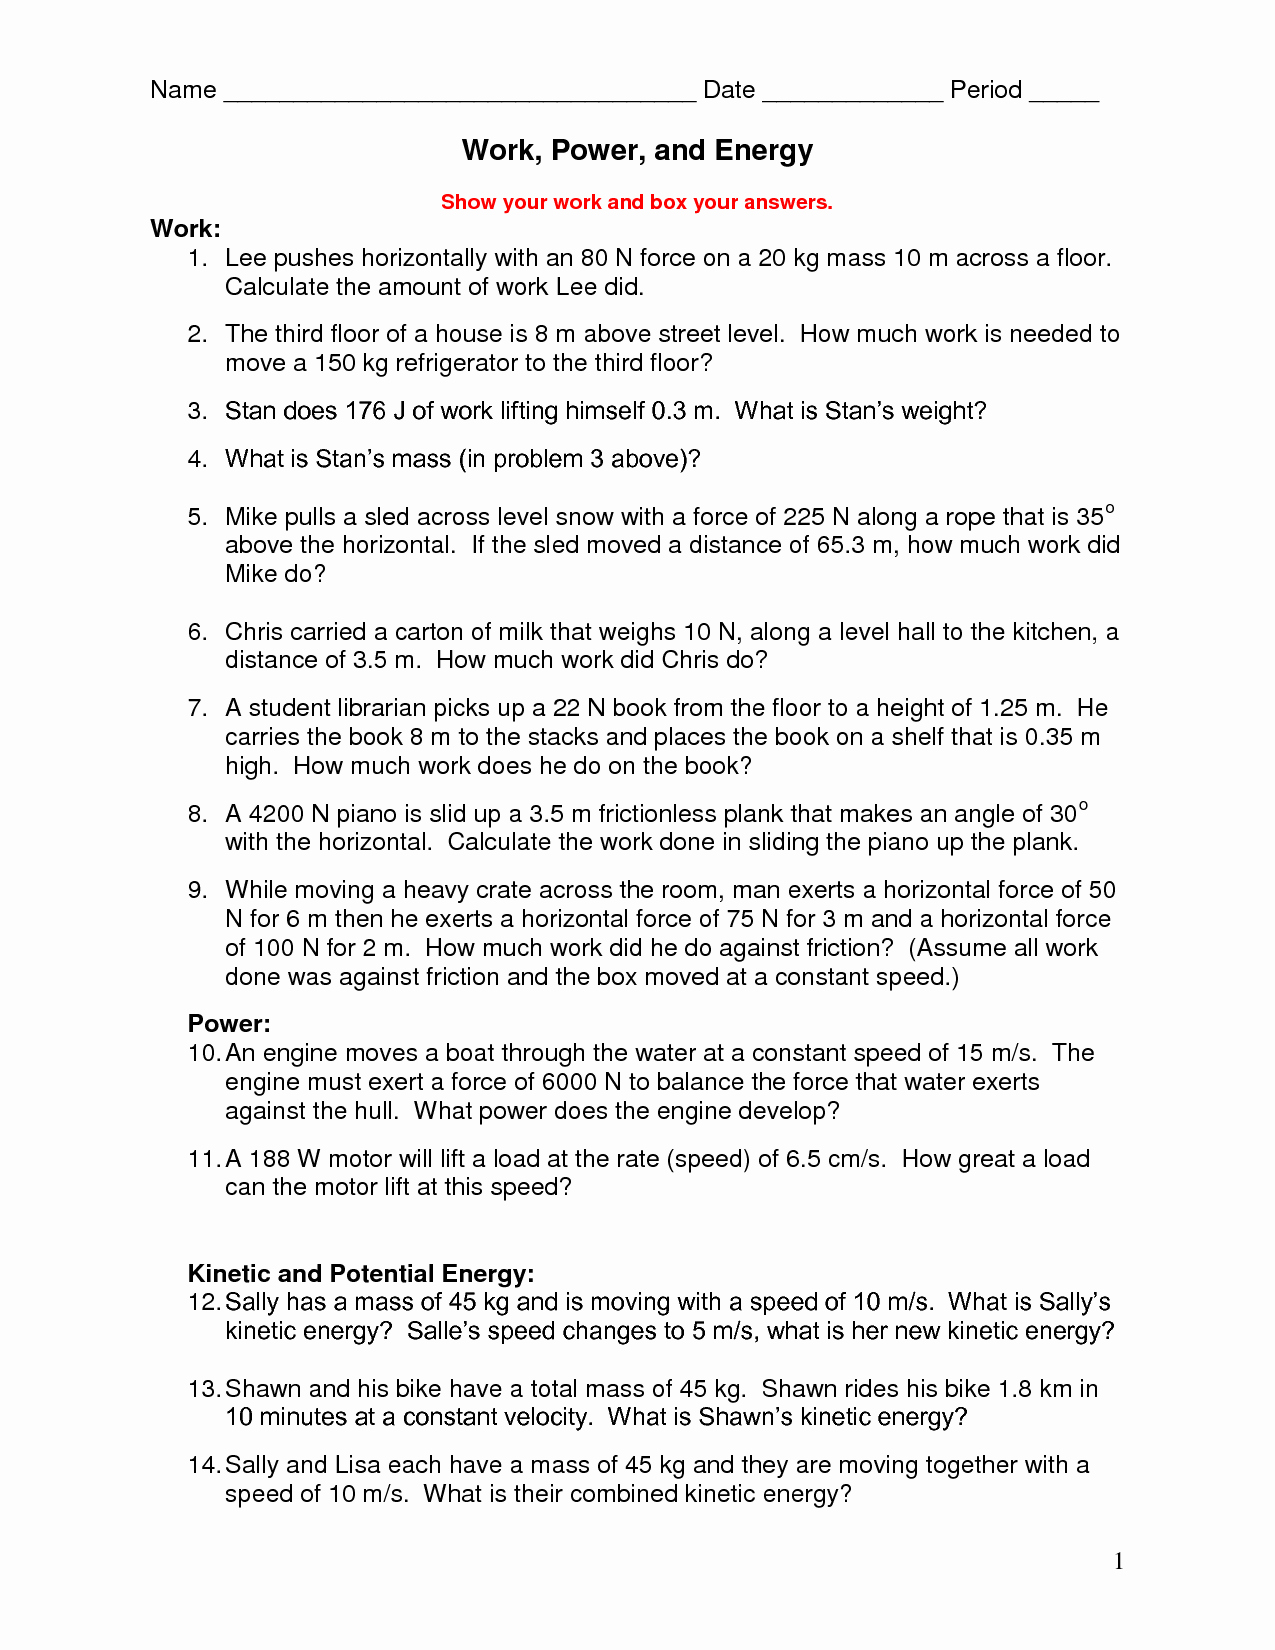 Work and Energy Worksheet Answers Beautiful 10 Best Of Work Energy and Power Worksheet